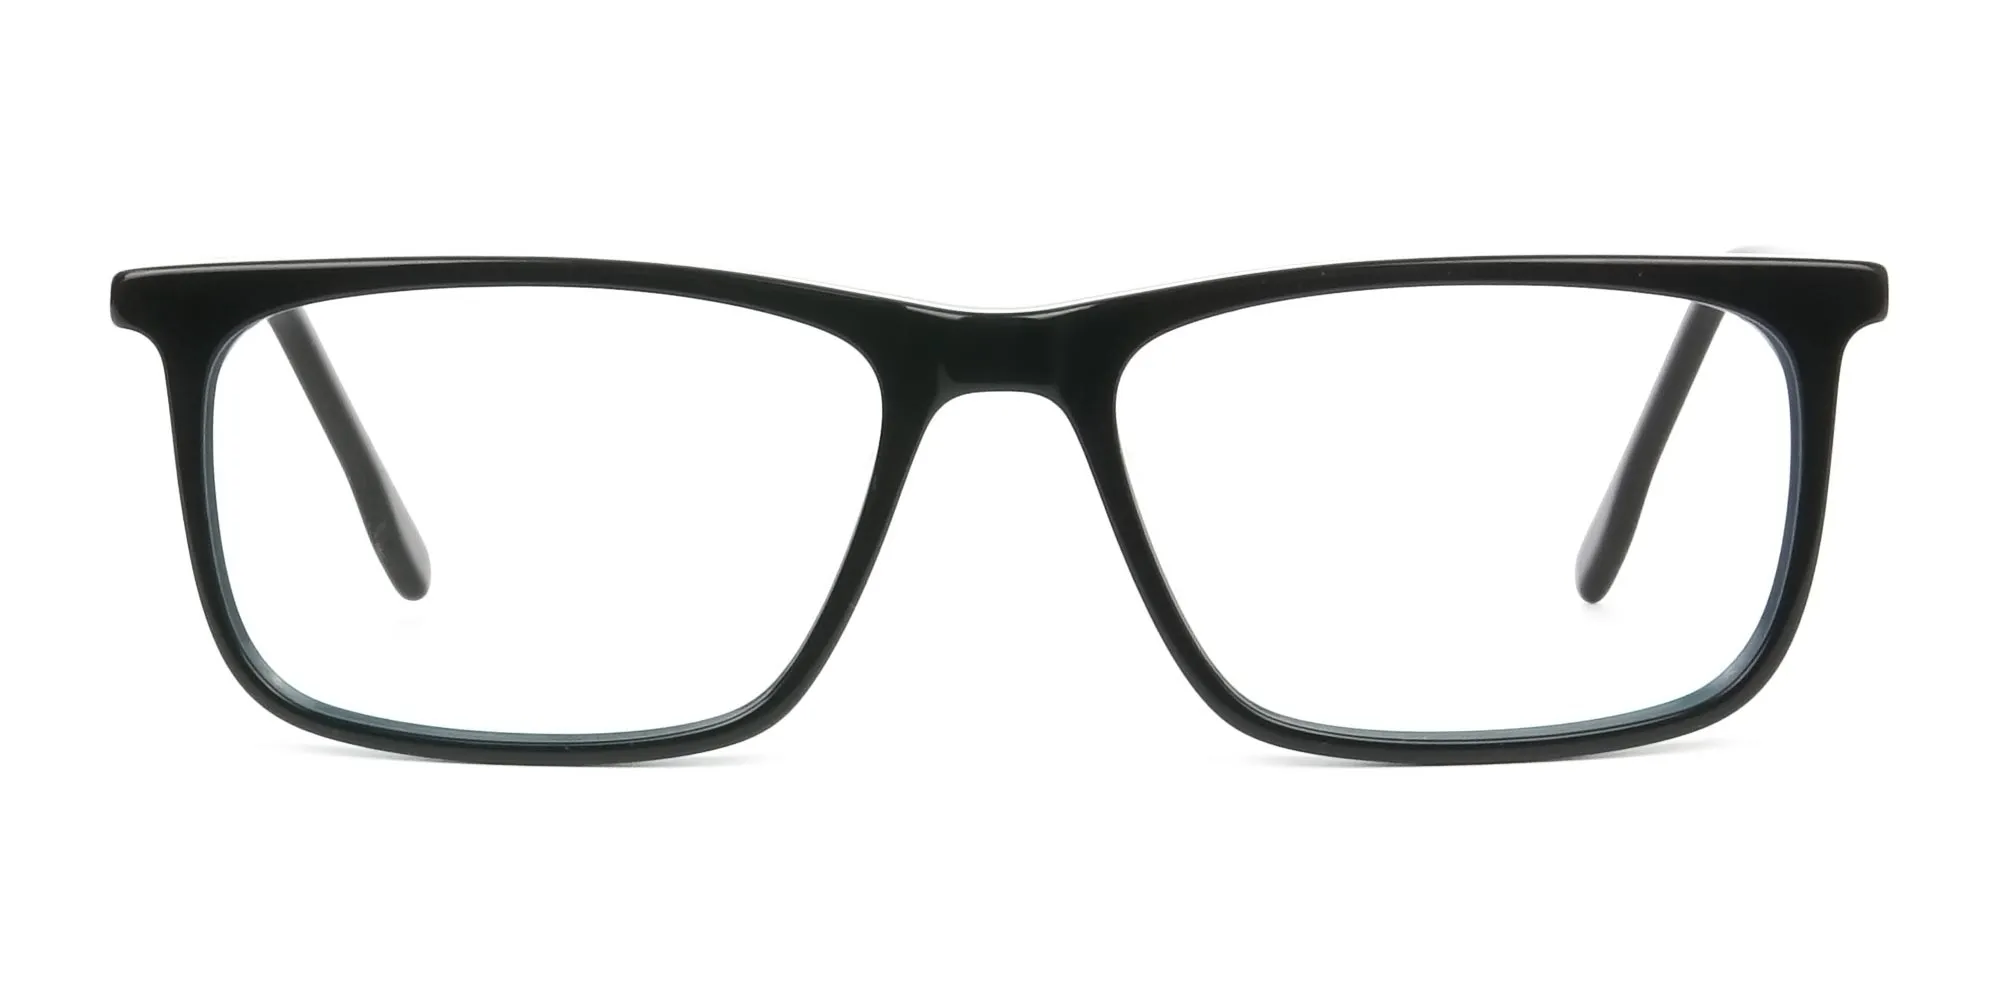 Black and Teal Spectacles in Rectangular - 2